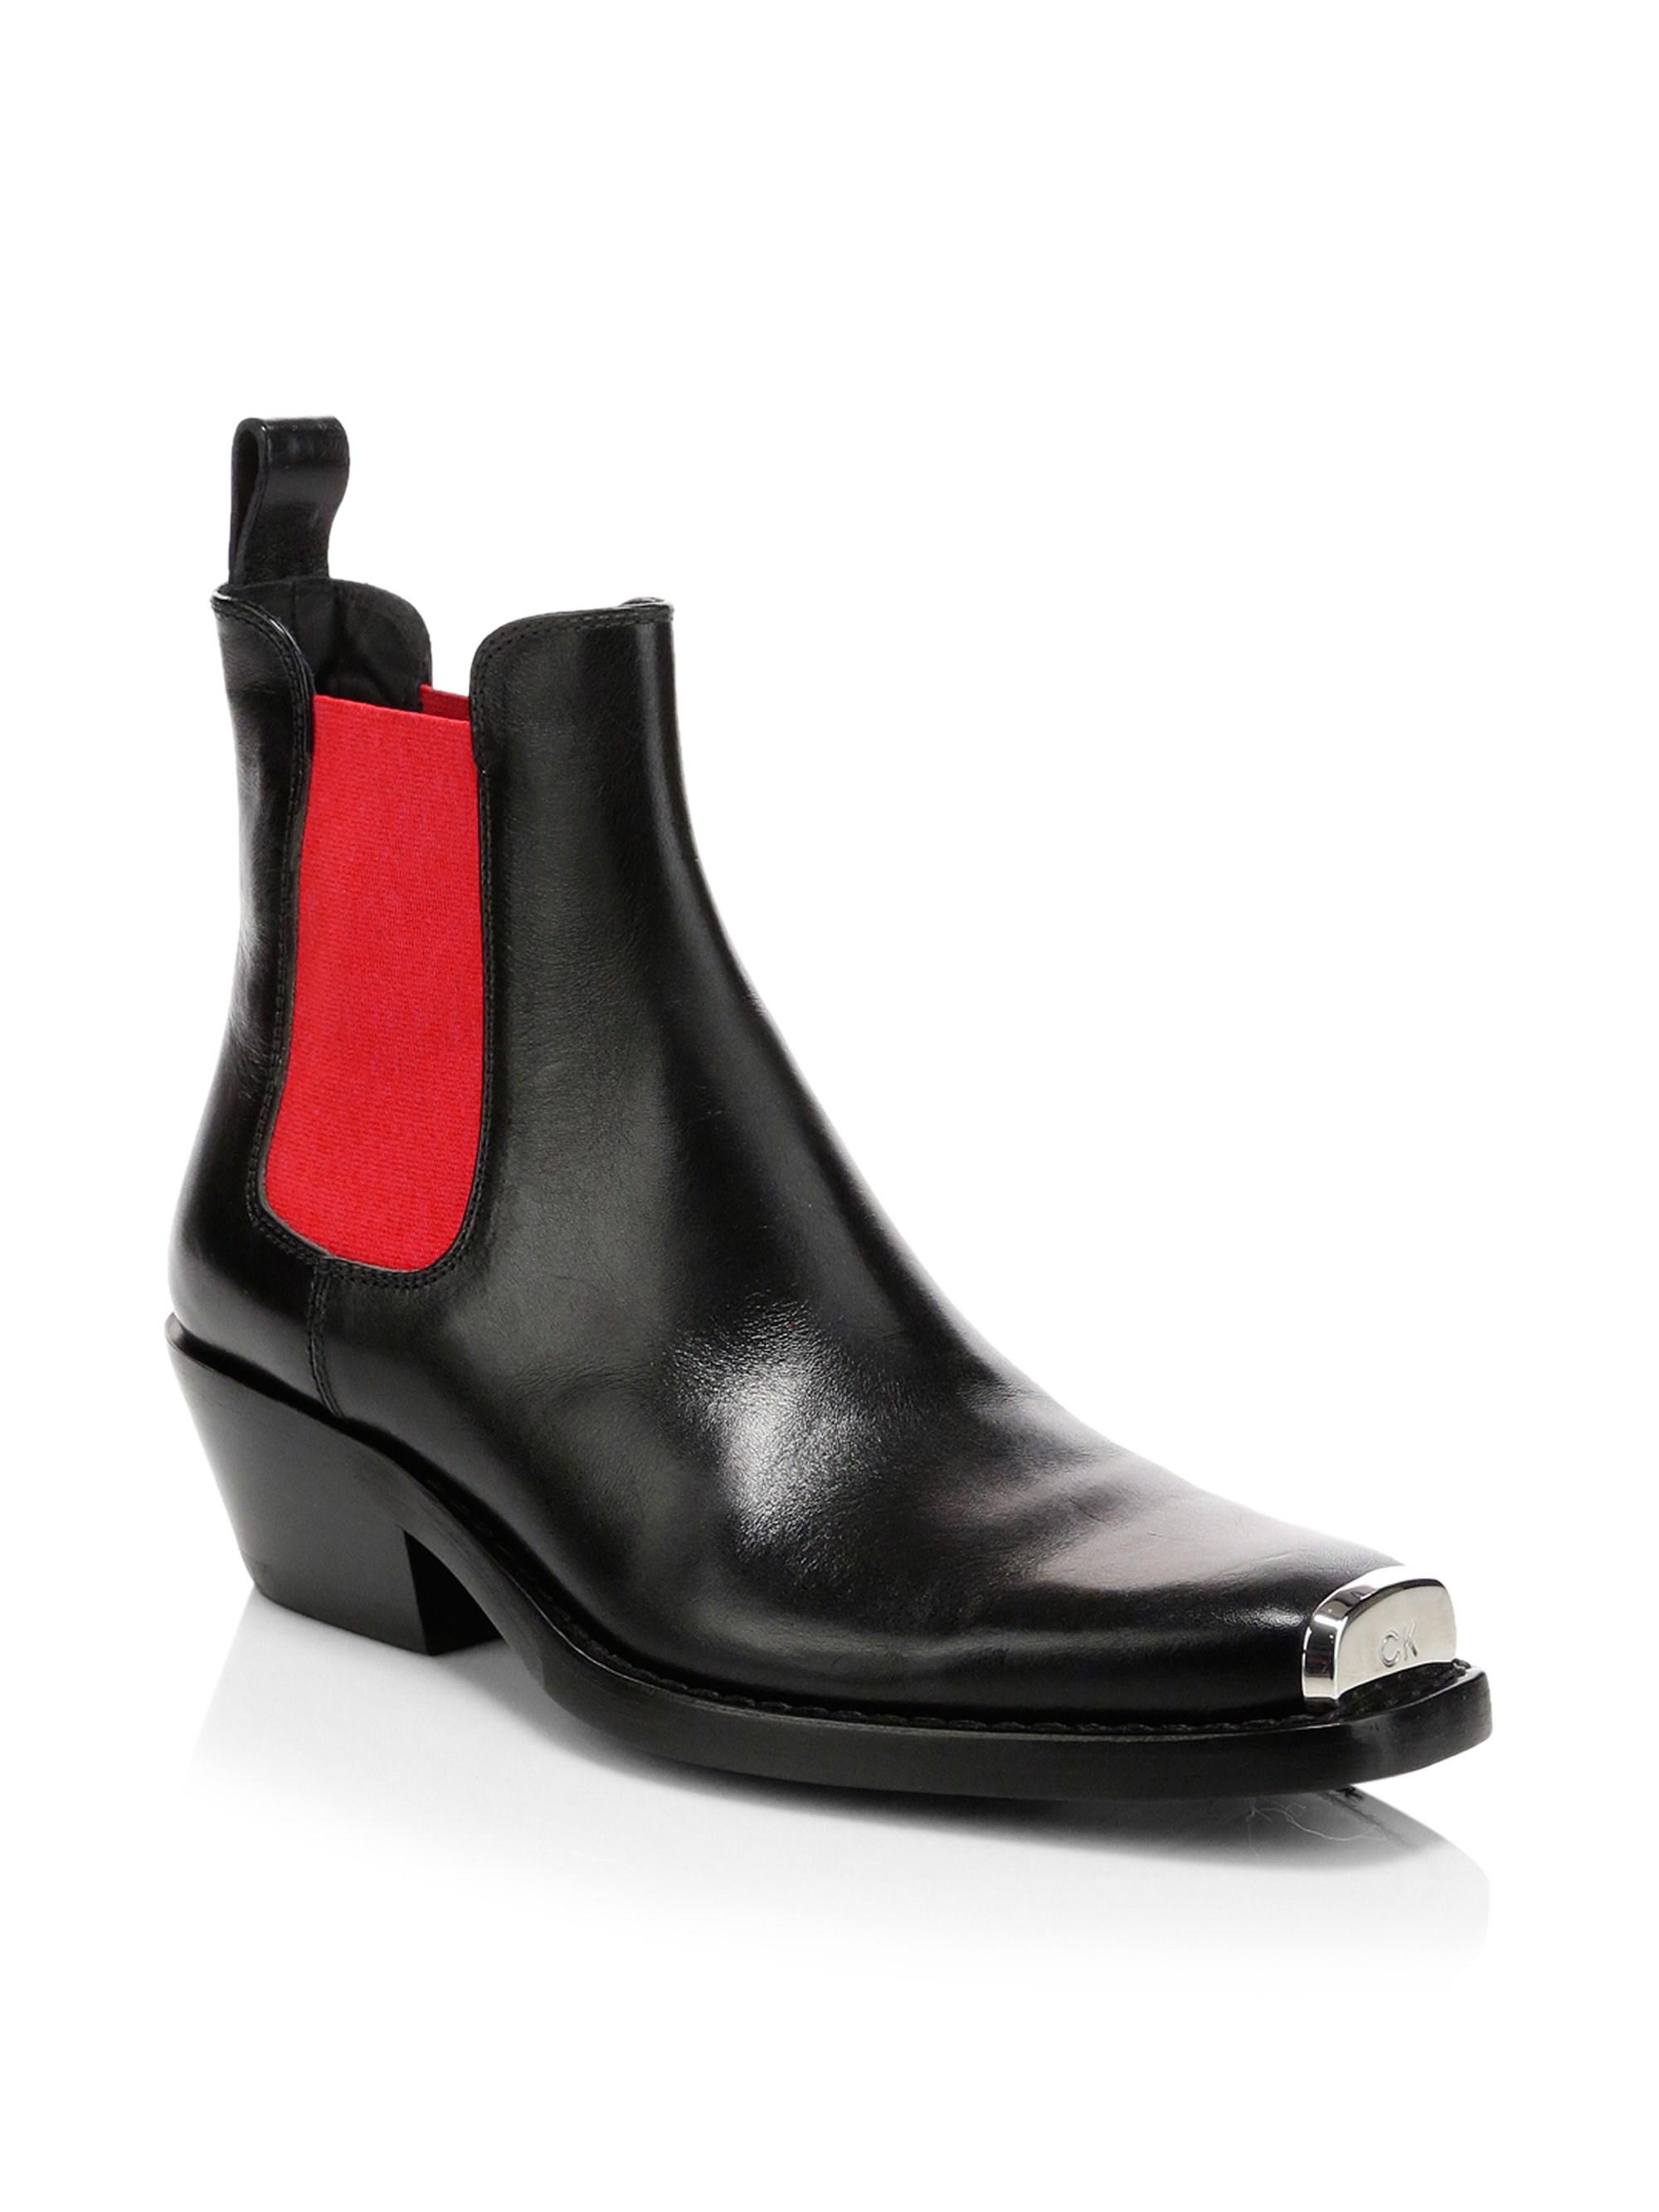 Calvin Klein Silver Toe Chelsea Boots In Calf Leather in Black Red (Black)  | Lyst